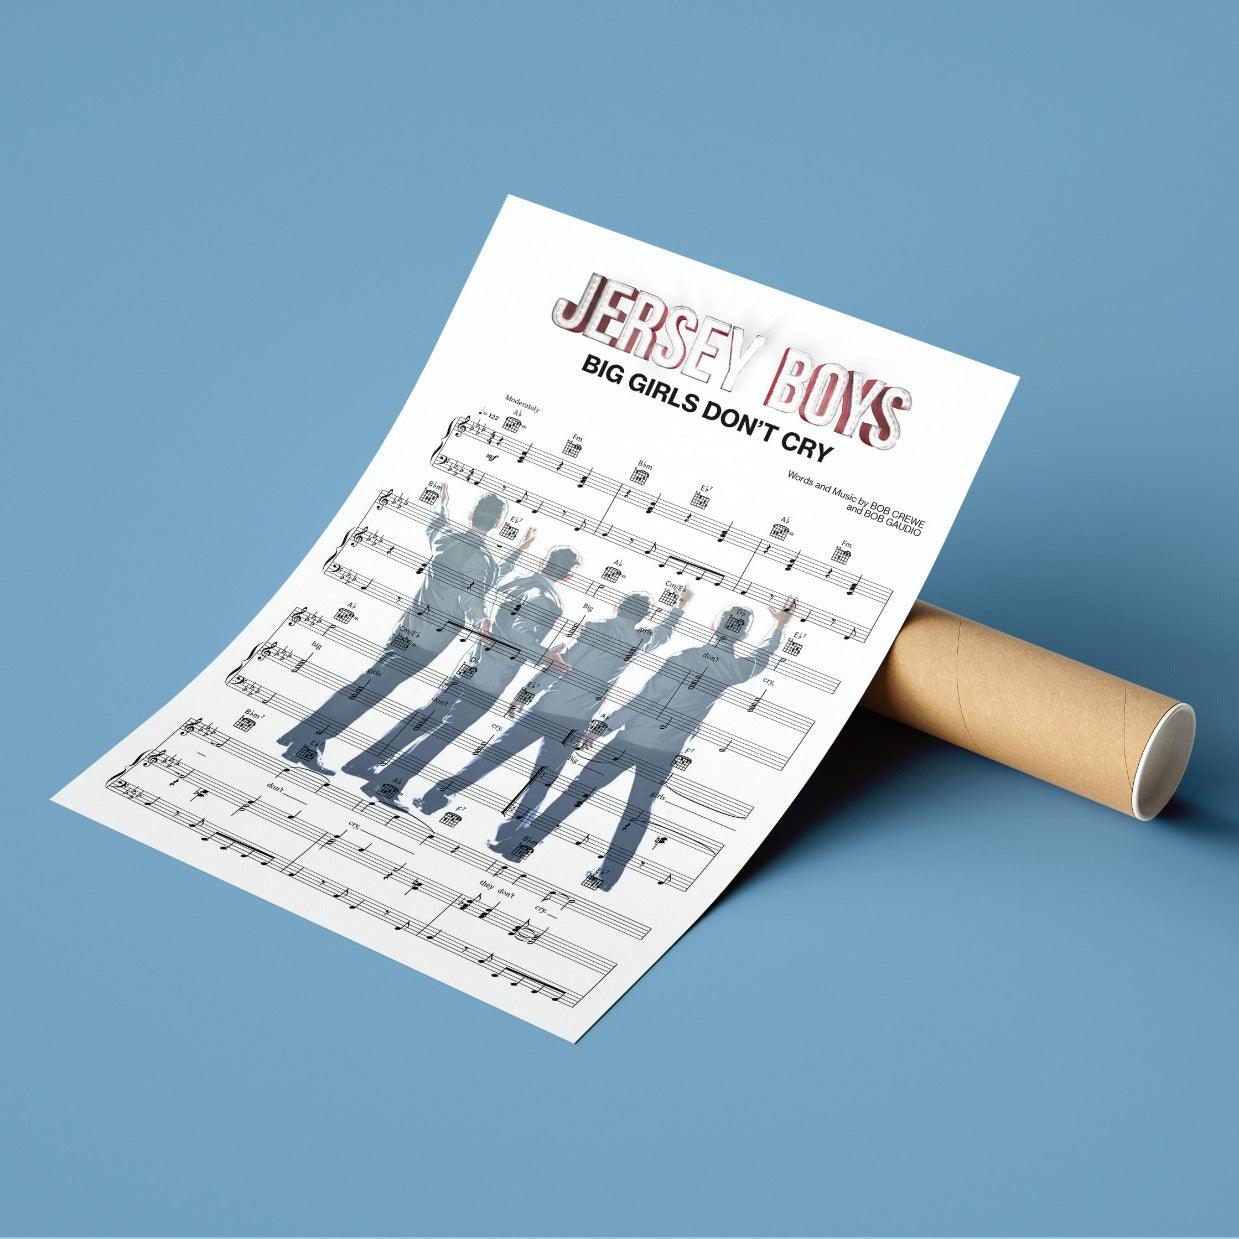 Jersey Boys - Big Girls Don't Cry Song Music Sheet Notes Print Everyone has a favorite Song lyric prints and with Jersey Boys now you can show the score as printed staff. The personal favorite song lyrics art shows the song chosen as the score.